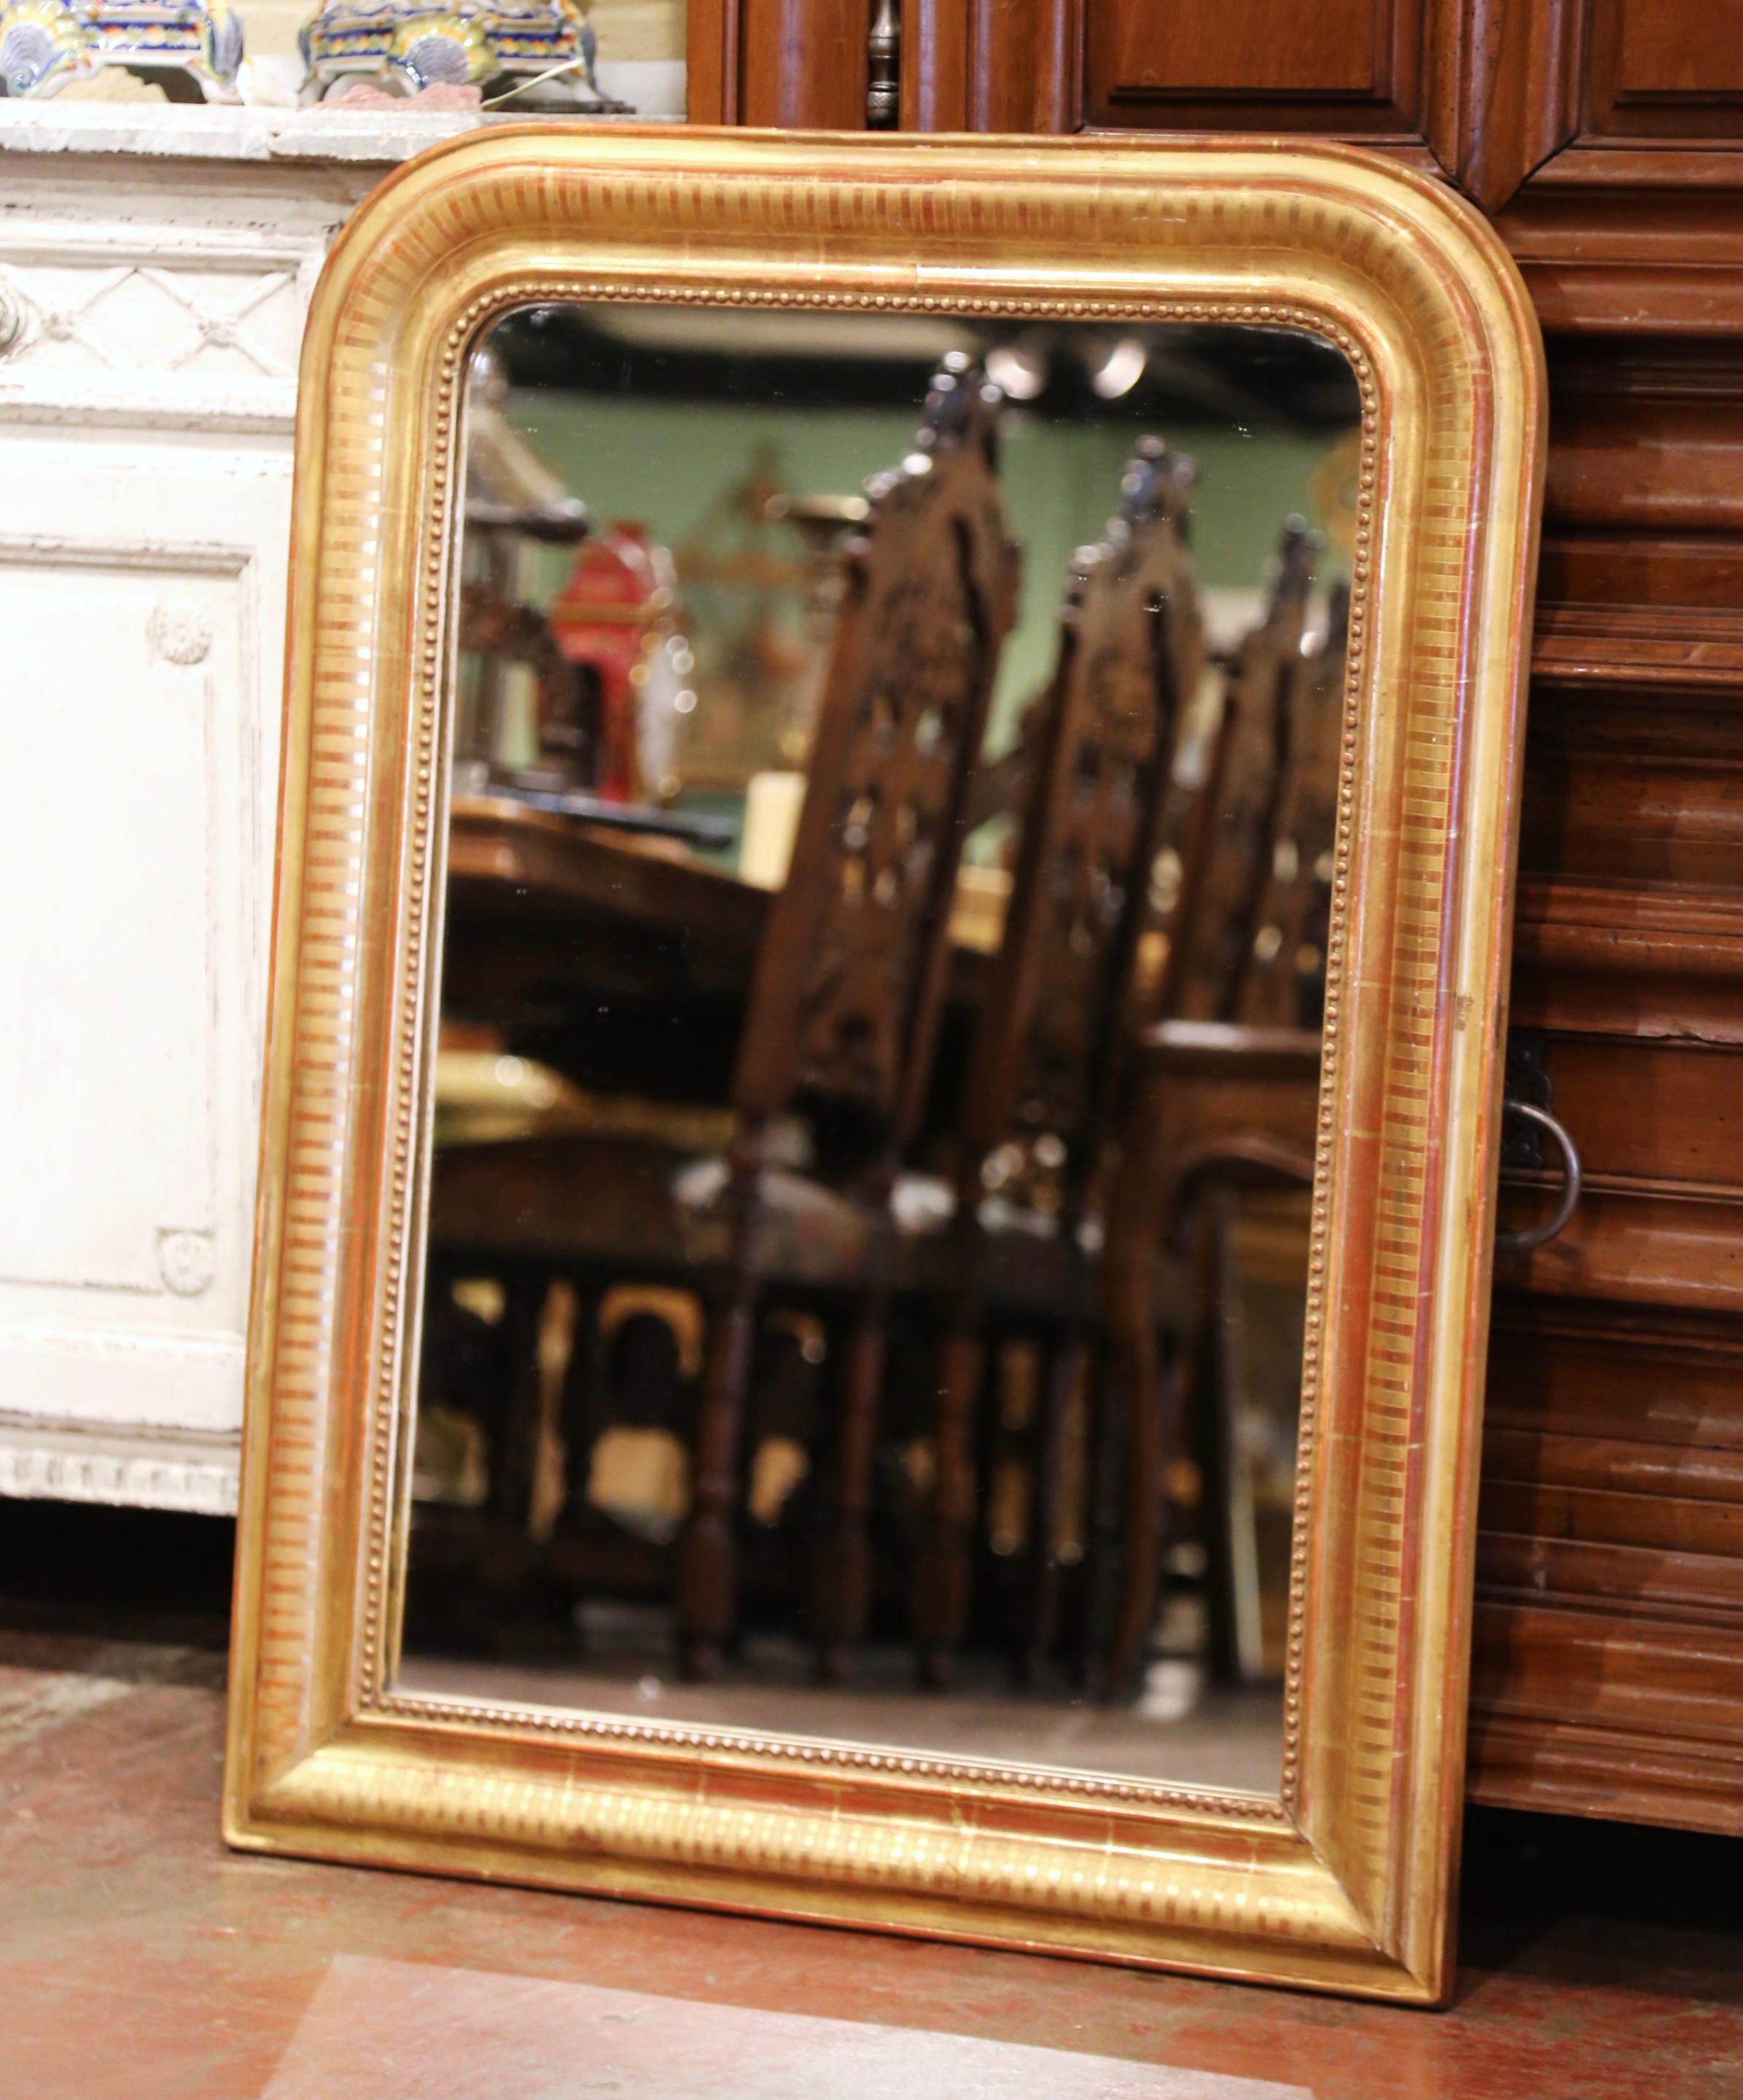 Crafted in the Burgundy region of France circa 1870, the antique mirror has traditional lines with rounded corners; the rectangular frame is decorated with a discrete engraved geometric motif, and further embellished with decorative beads around the